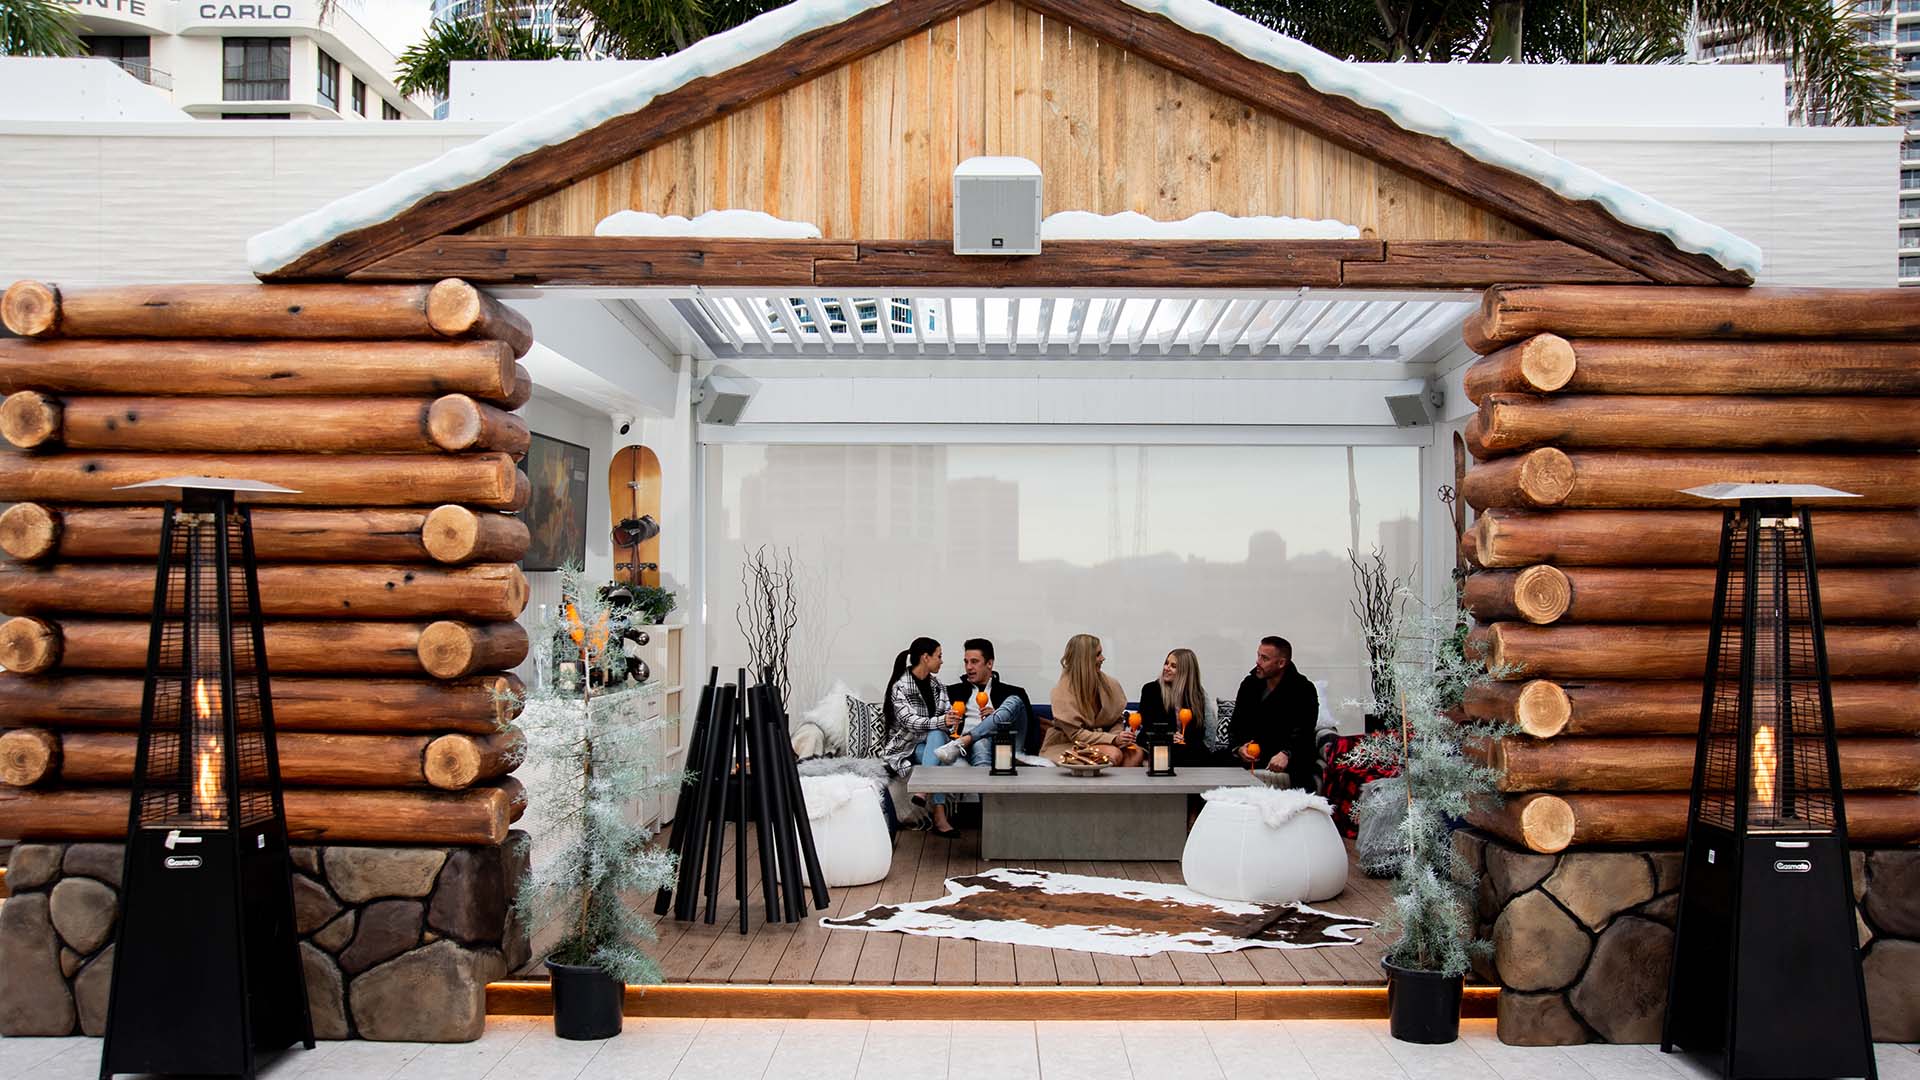 The Gold Coast's Rooftop Beach Club Is Turning Into a Sky-High (and Snowy) Alpine Lodge for Winter